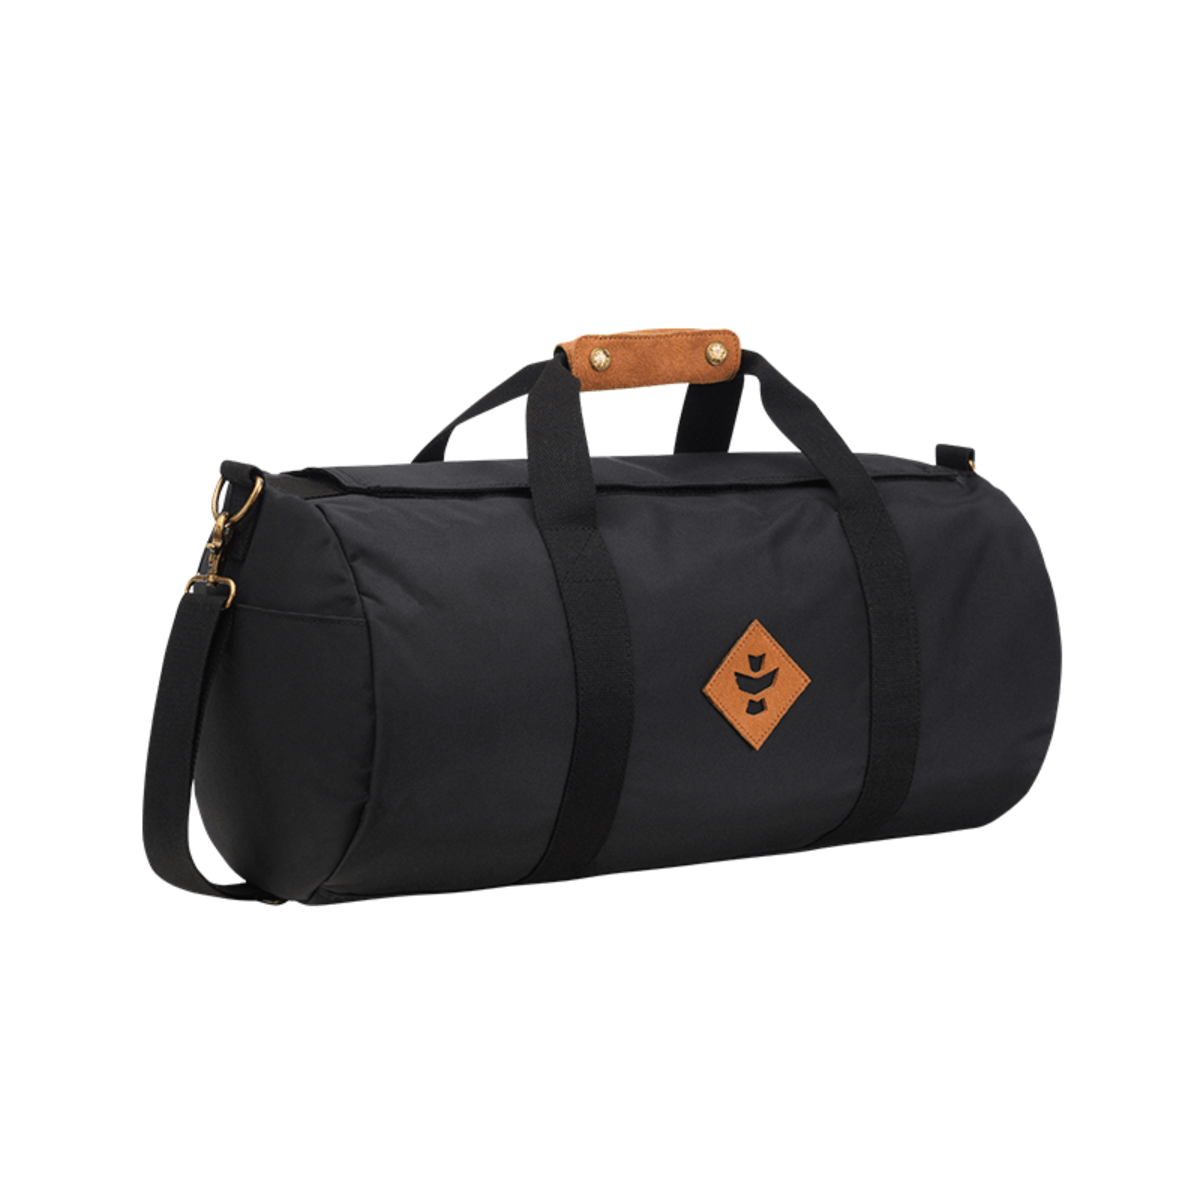 revelry overnighter smell proof duffle bag